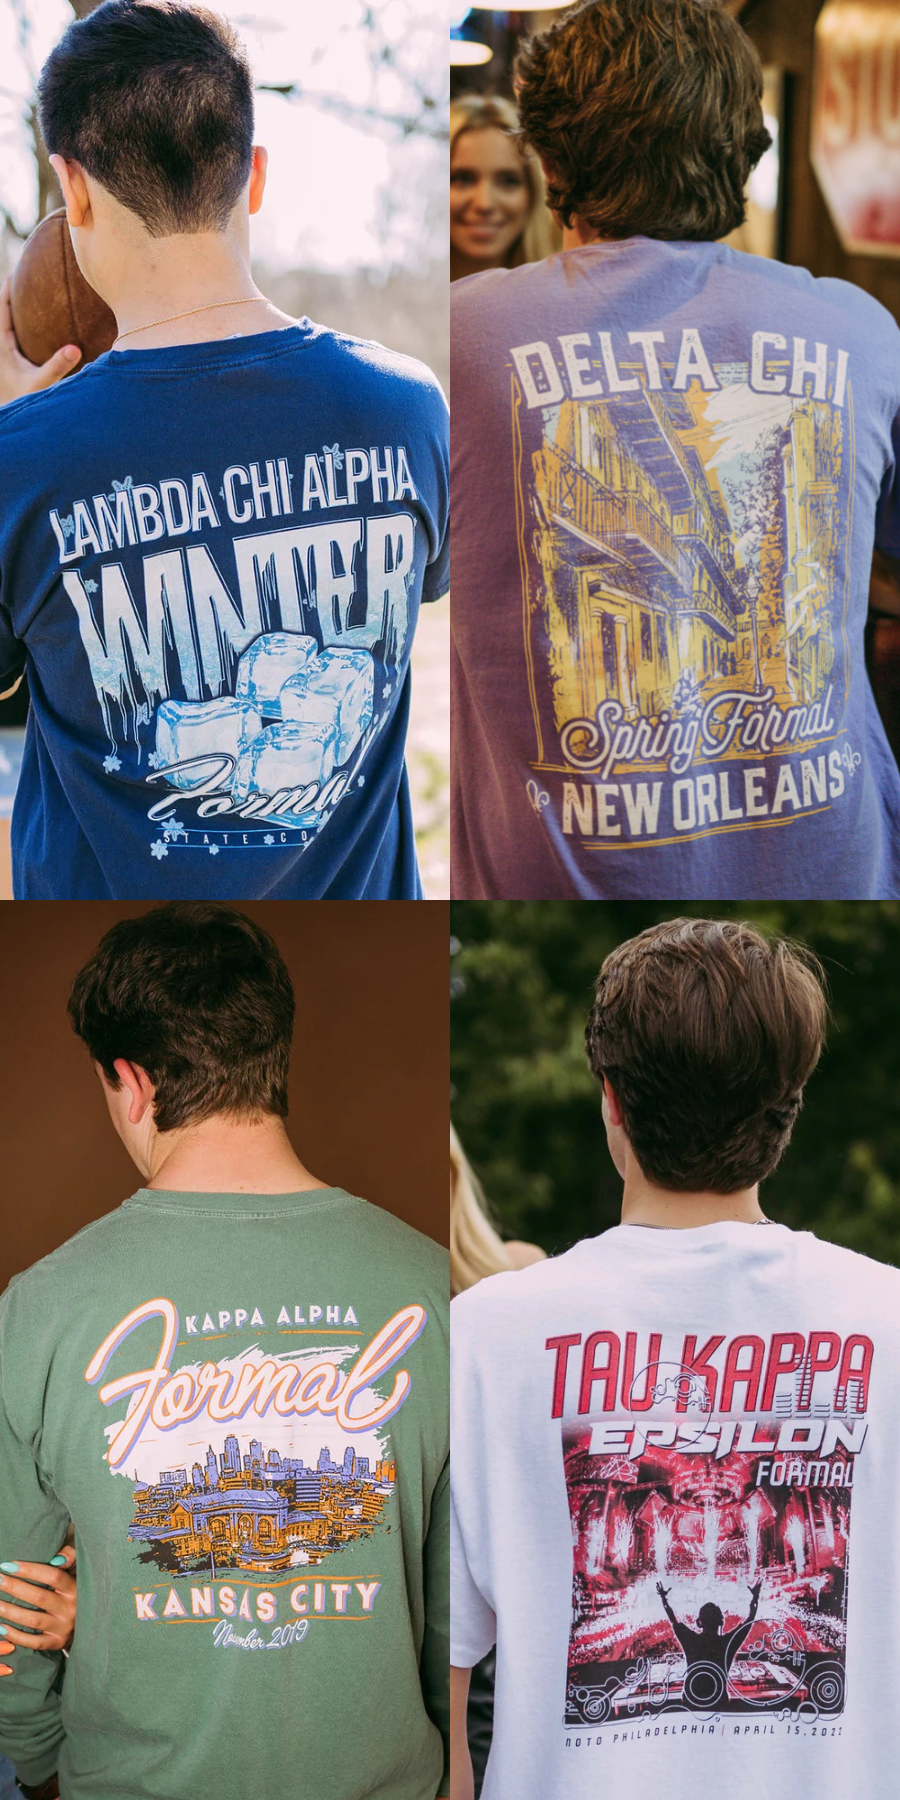 Four boys' backs face the camera wearing various fraternity formal tshirts.